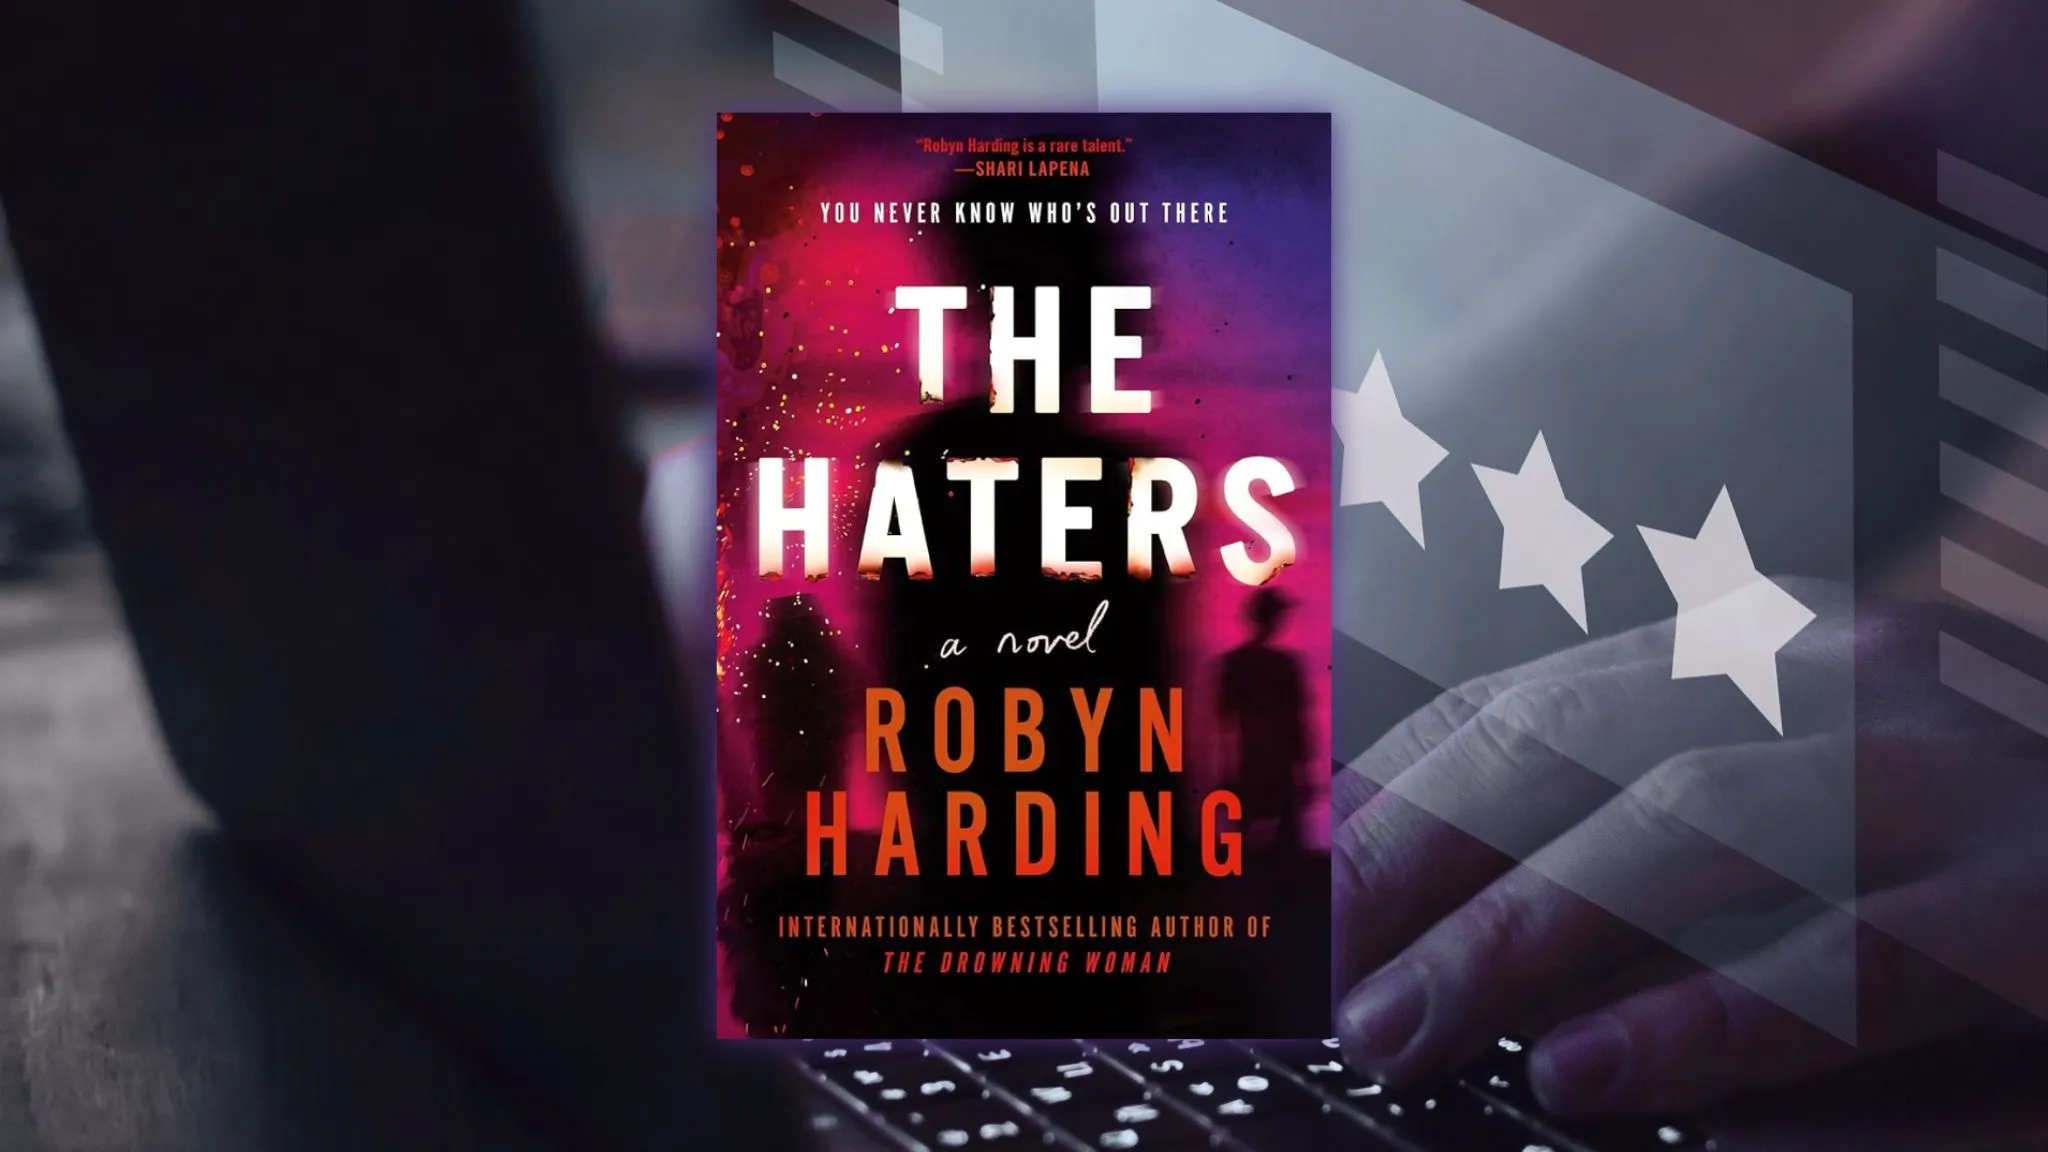 Robyn Harding talks about fame, “The Haters” and one-star book reviews